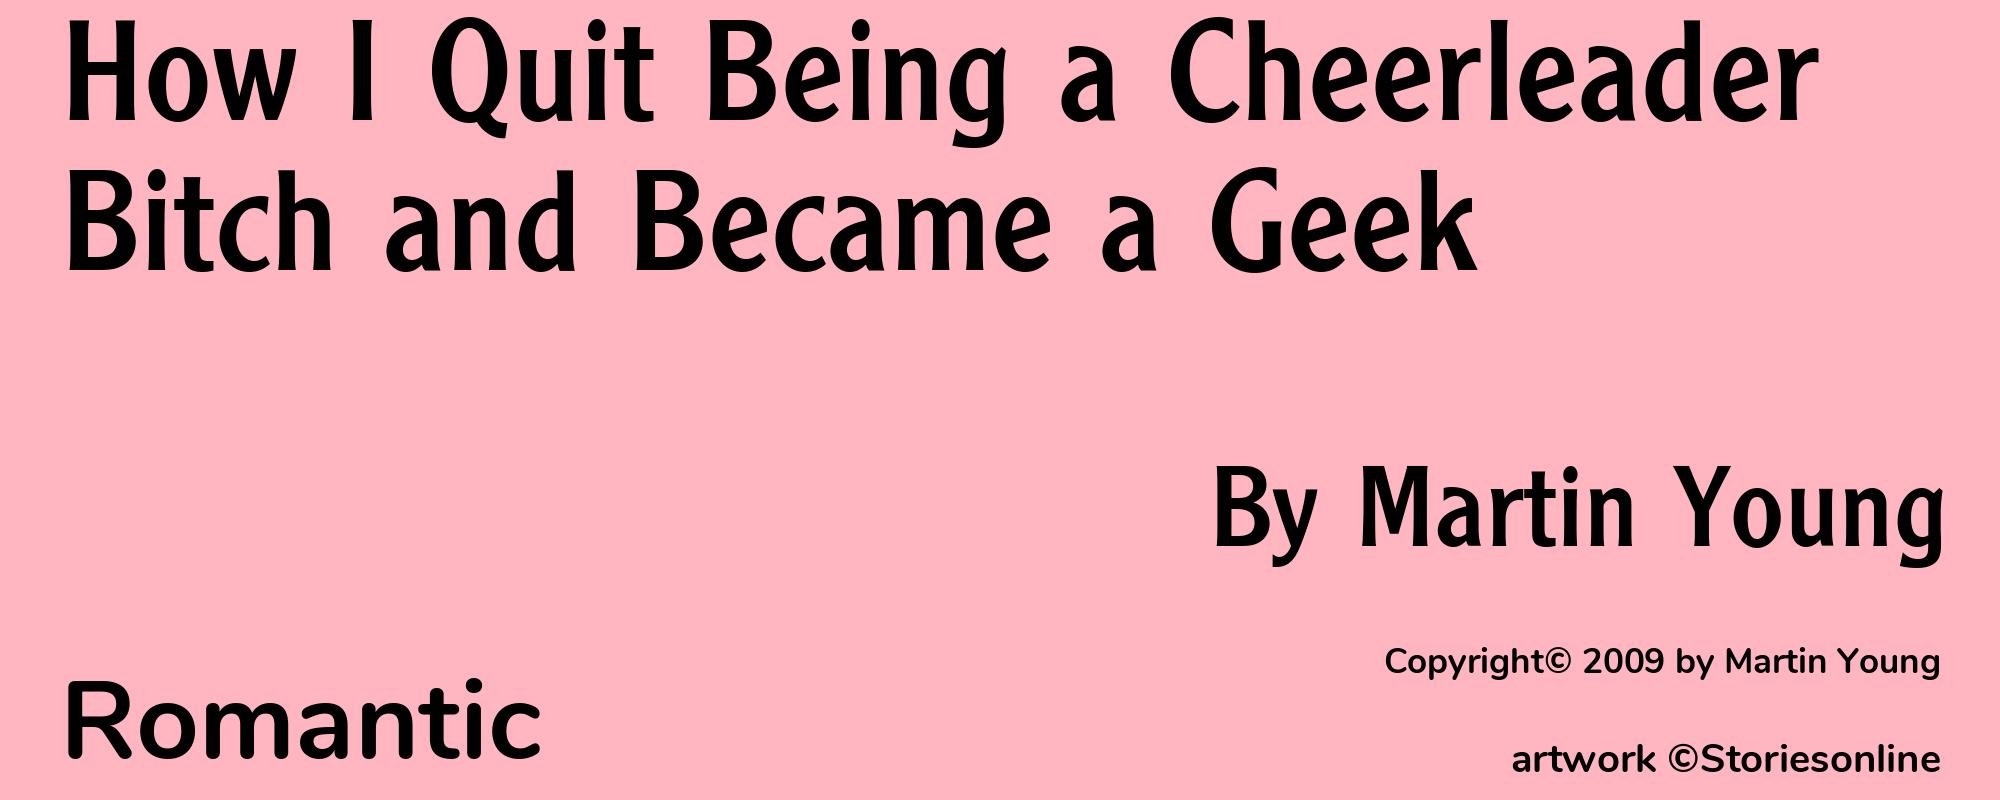 How I Quit Being a Cheerleader Bitch and Became a Geek - Cover